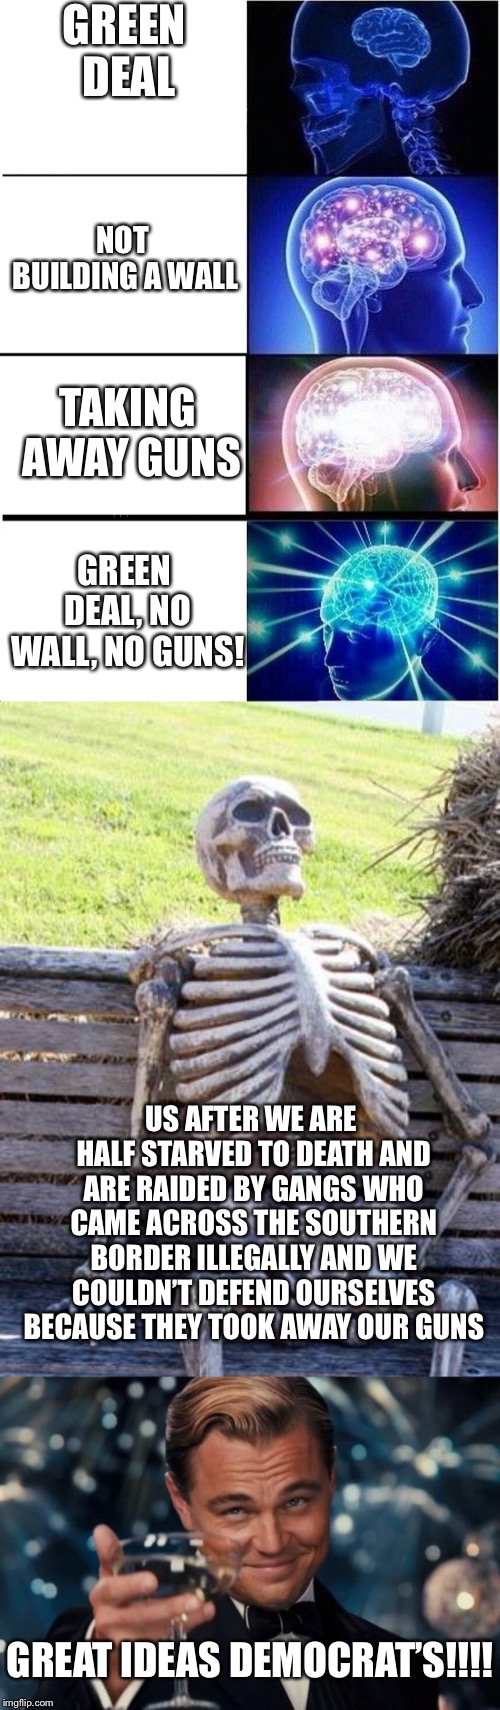 GREEN DEAL; NOT BUILDING A WALL; TAKING AWAY GUNS; GREEN DEAL, NO WALL, NO GUNS! US AFTER WE ARE HALF STARVED TO DEATH AND ARE RAIDED BY GANGS WHO CAME ACROSS THE SOUTHERN BORDER ILLEGALLY AND WE COULDN’T DEFEND OURSELVES BECAUSE THEY TOOK AWAY OUR GUNS; GREAT IDEAS DEMOCRAT’S!!!! | image tagged in memes,waiting skeleton,leonardo dicaprio cheers,expanding brain | made w/ Imgflip meme maker